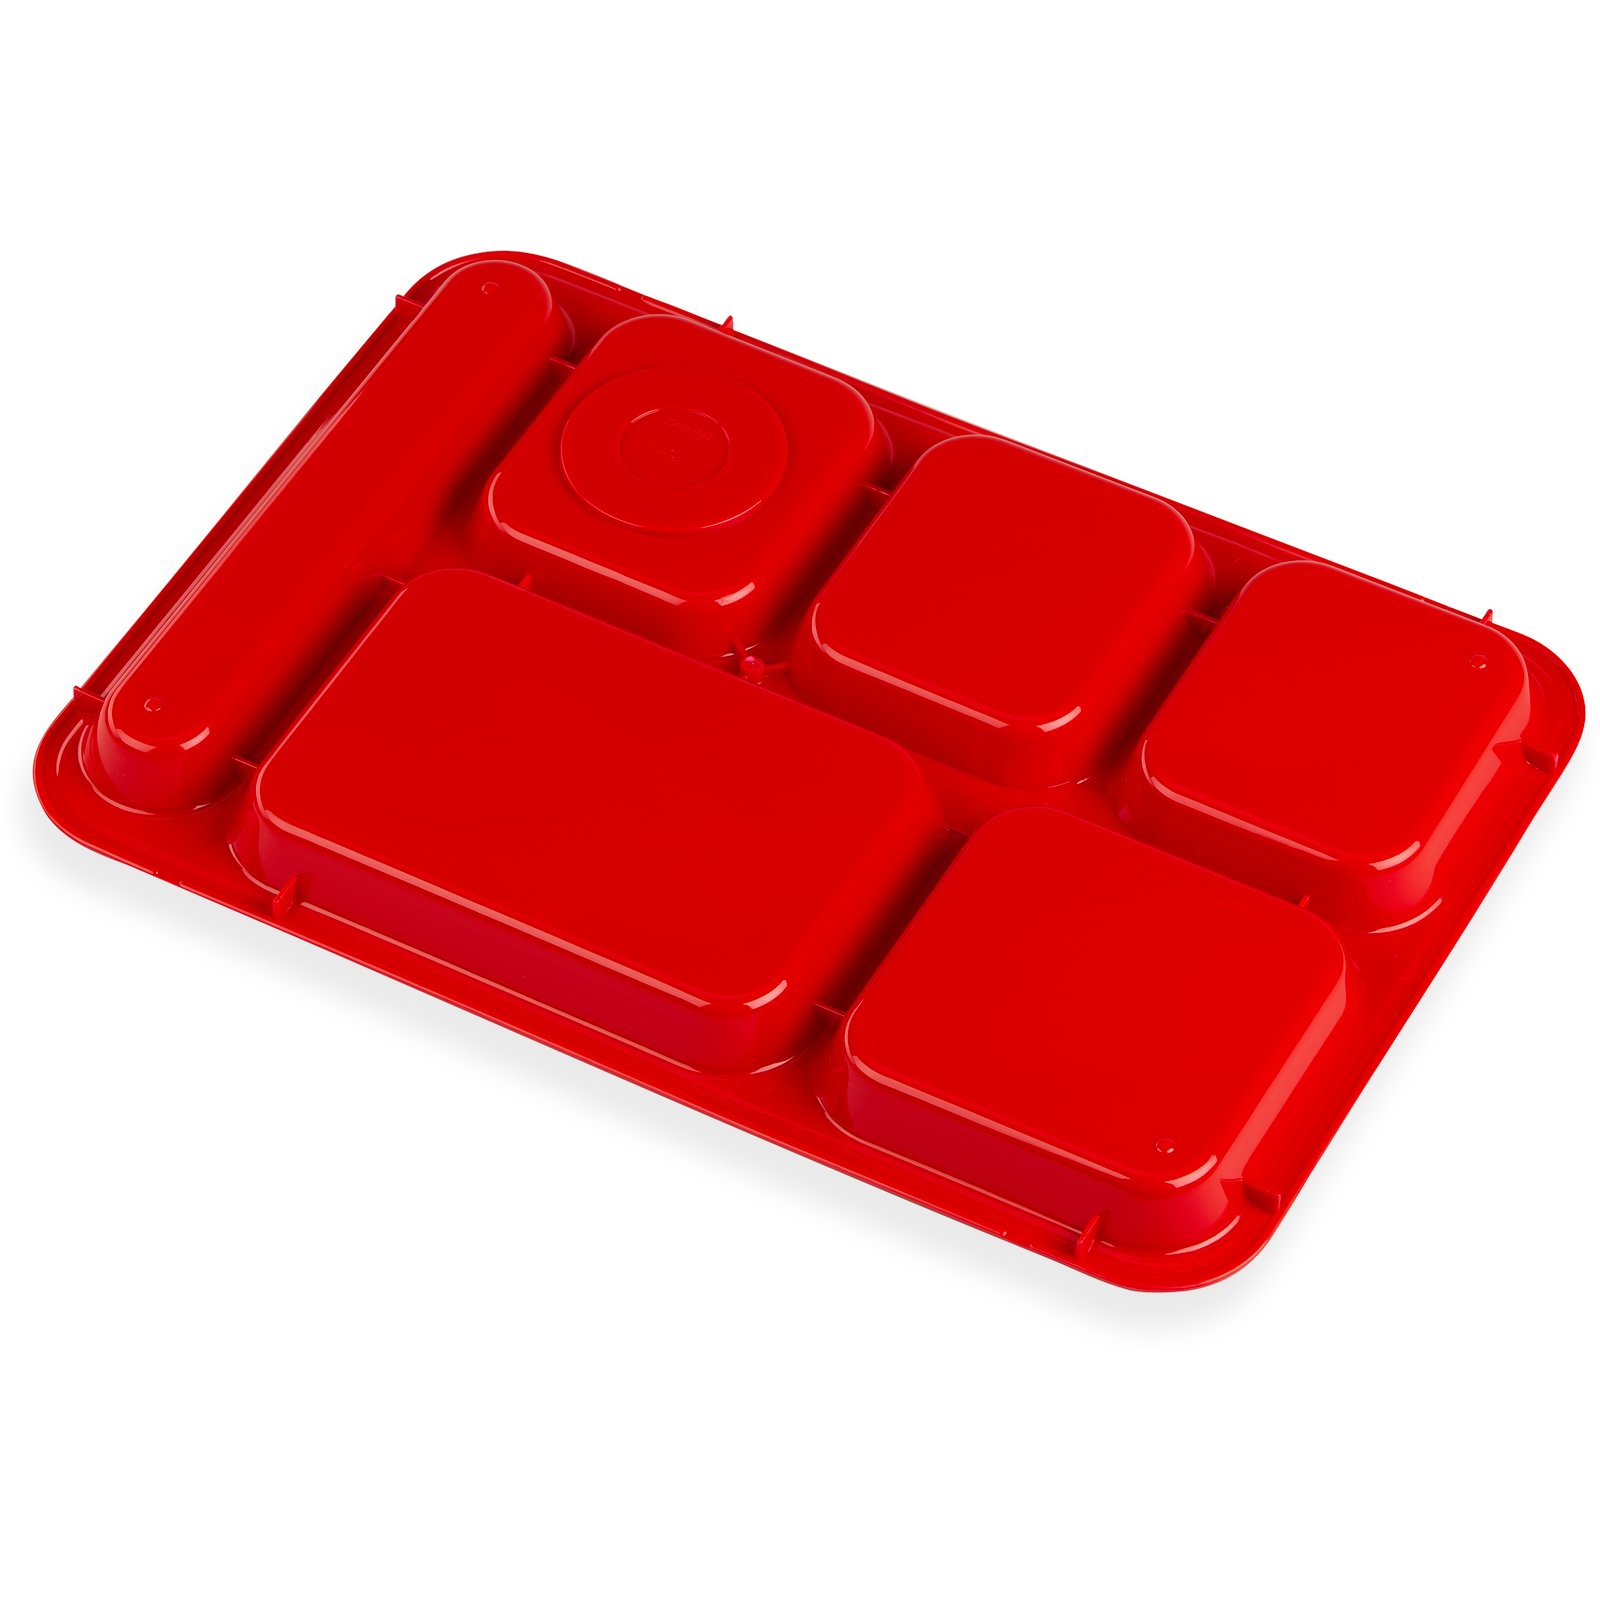 Cranberry, 2×2 Co-Polymer 6-Compartment Cafeteria Trays, 24/PK